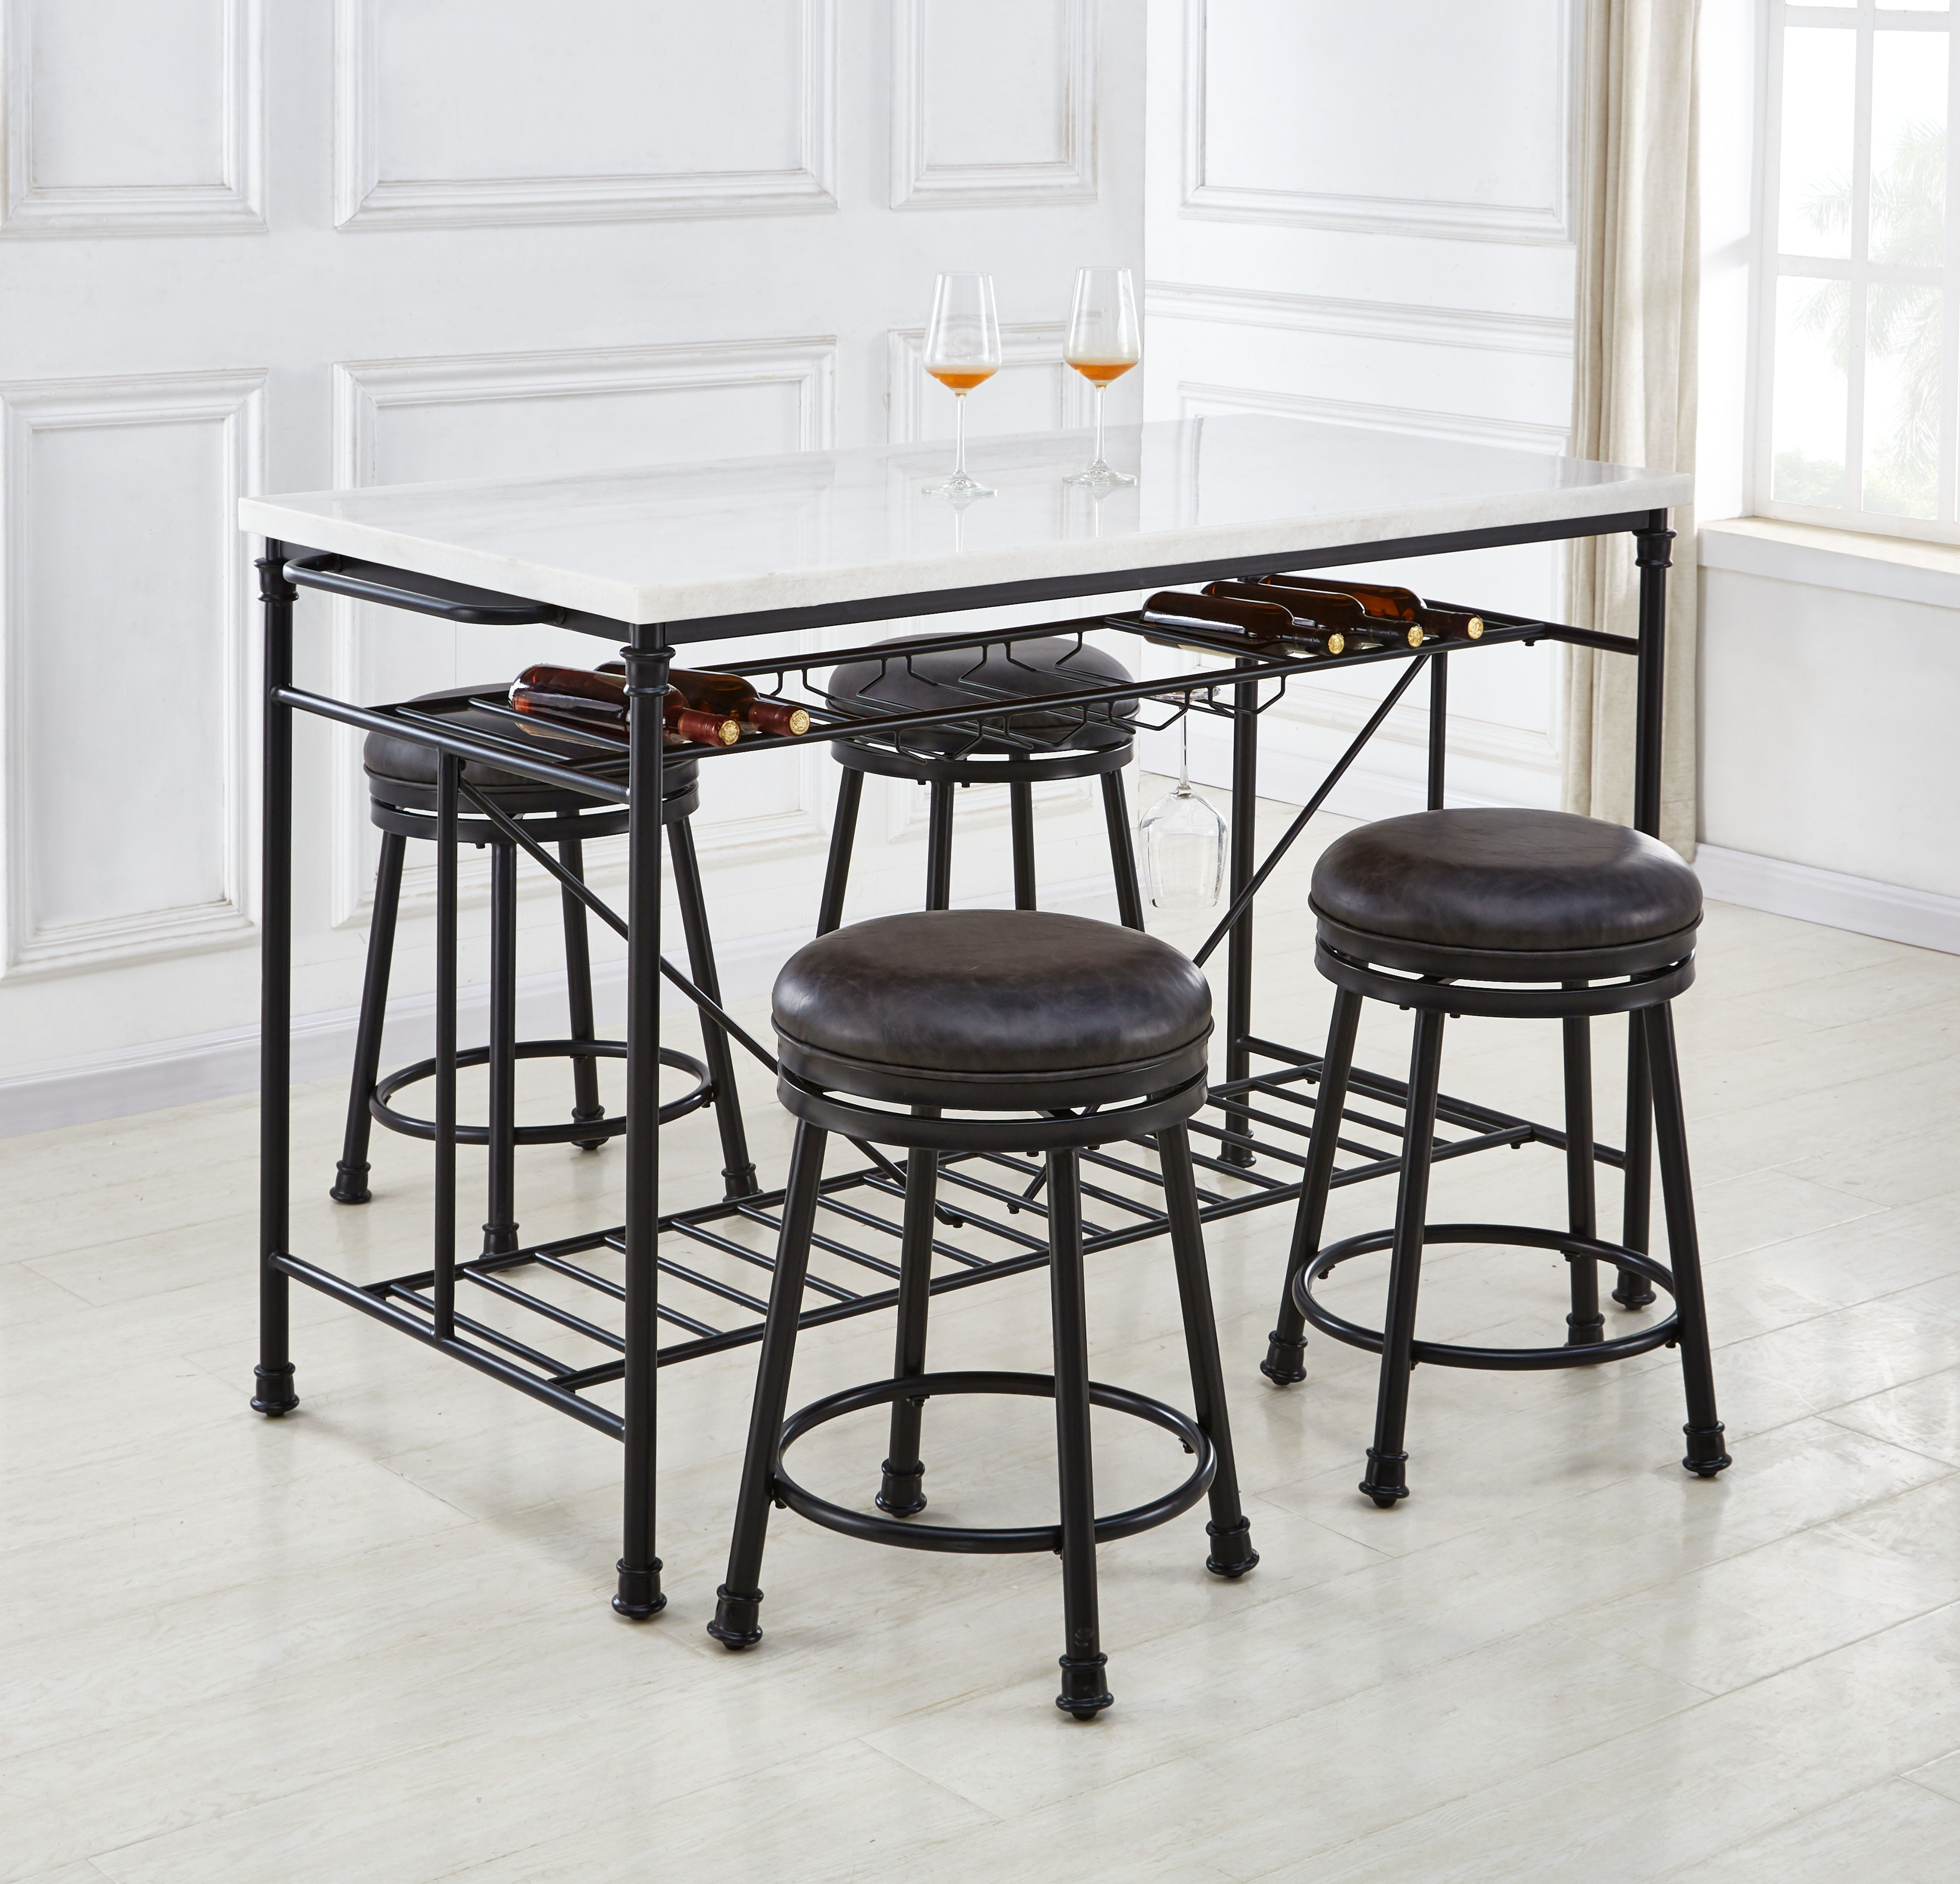 Claire - 5 Piece Set (Kitchen Island And 4 Stools) - Black